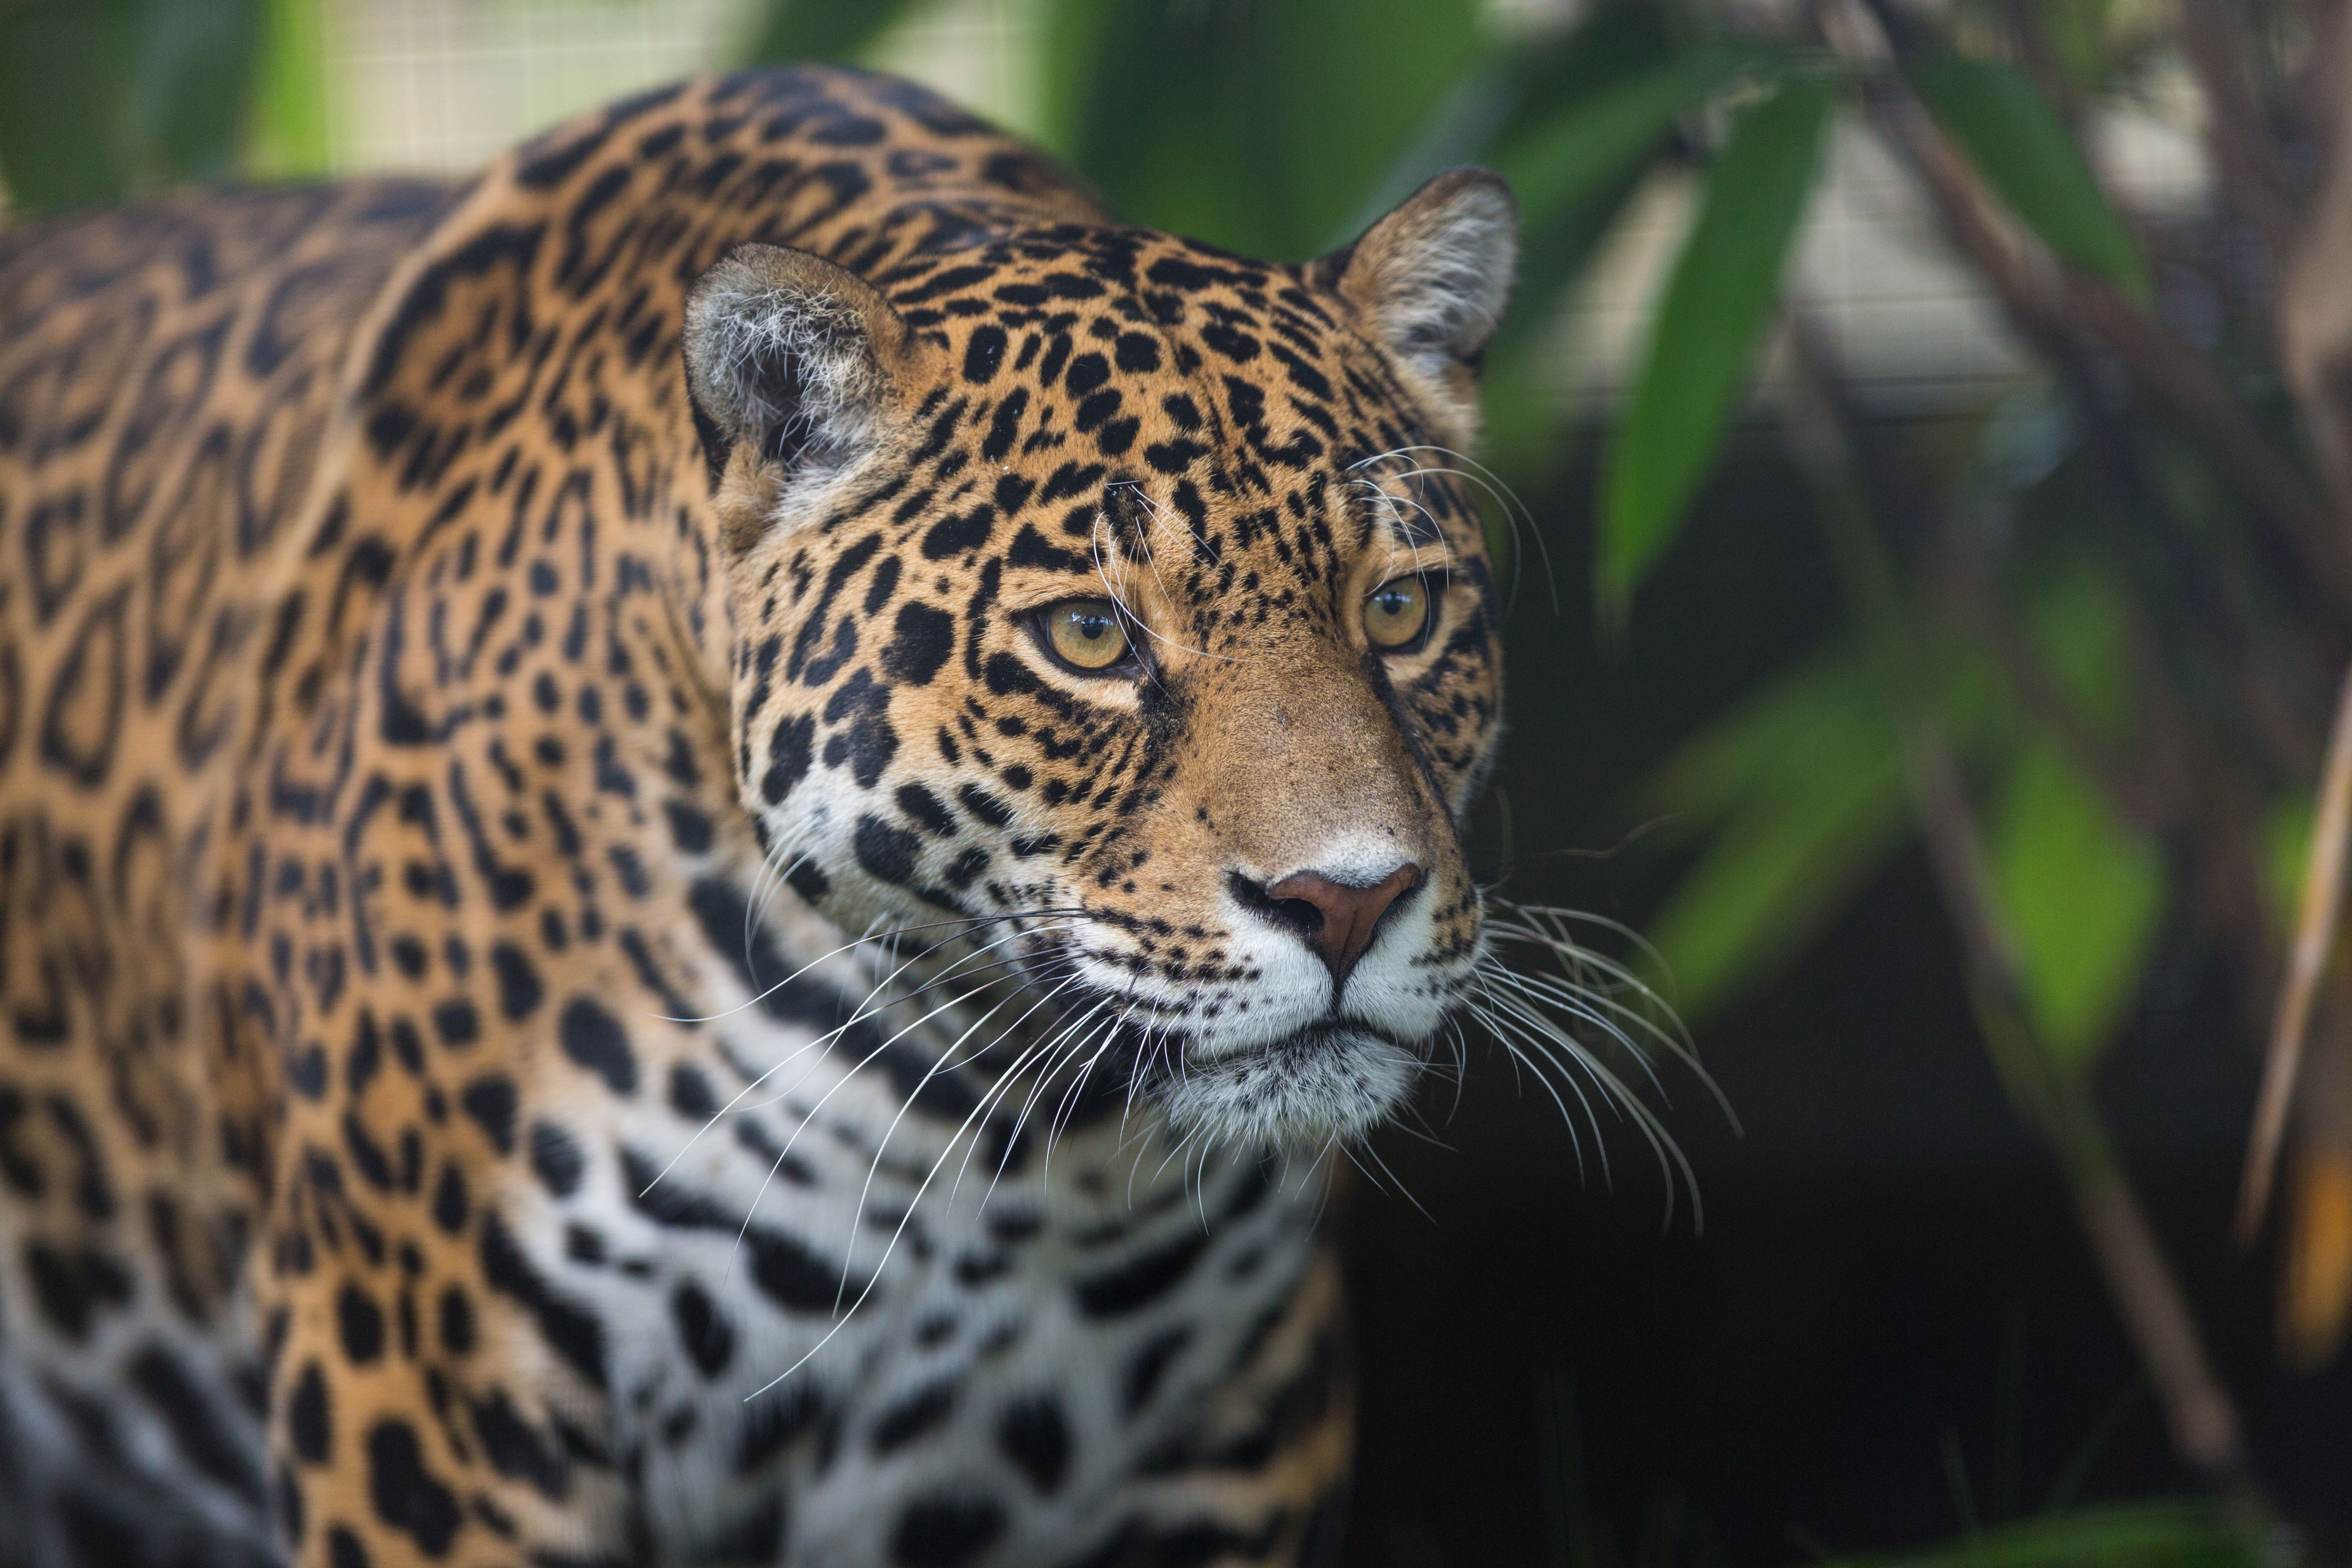 Jaguars in the media: what we know and do not know about illegal jaguar  trade - Oxford Martin Programme on the Wildlife Trade